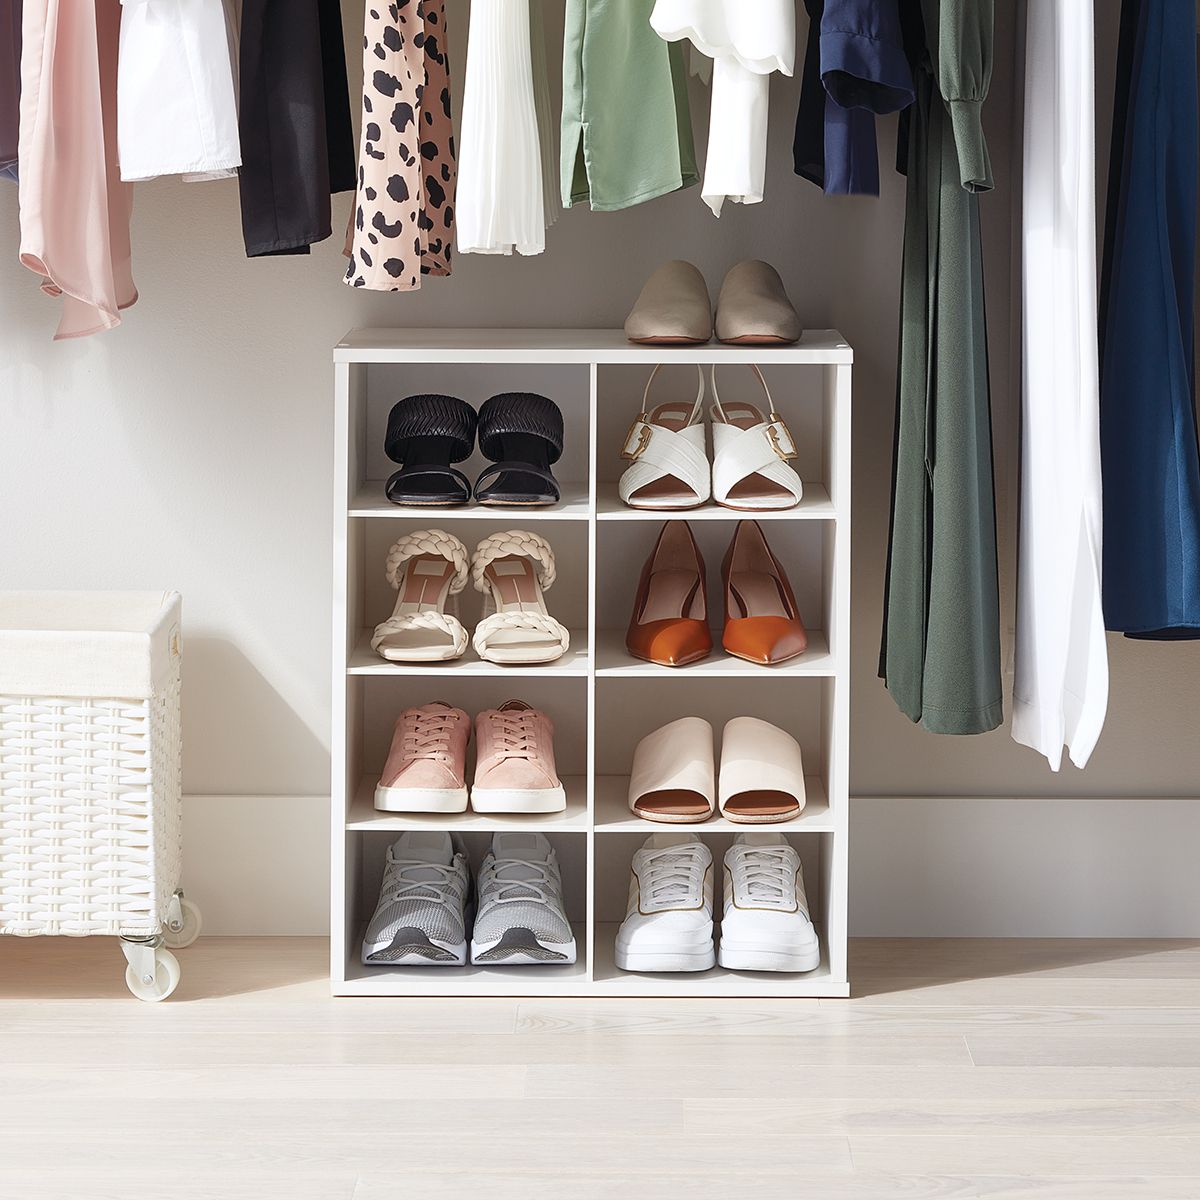 The Container Store 8 Pair Shoe Organizer | The Container Store Inside Wardrobes Shoe Storages (View 12 of 15)